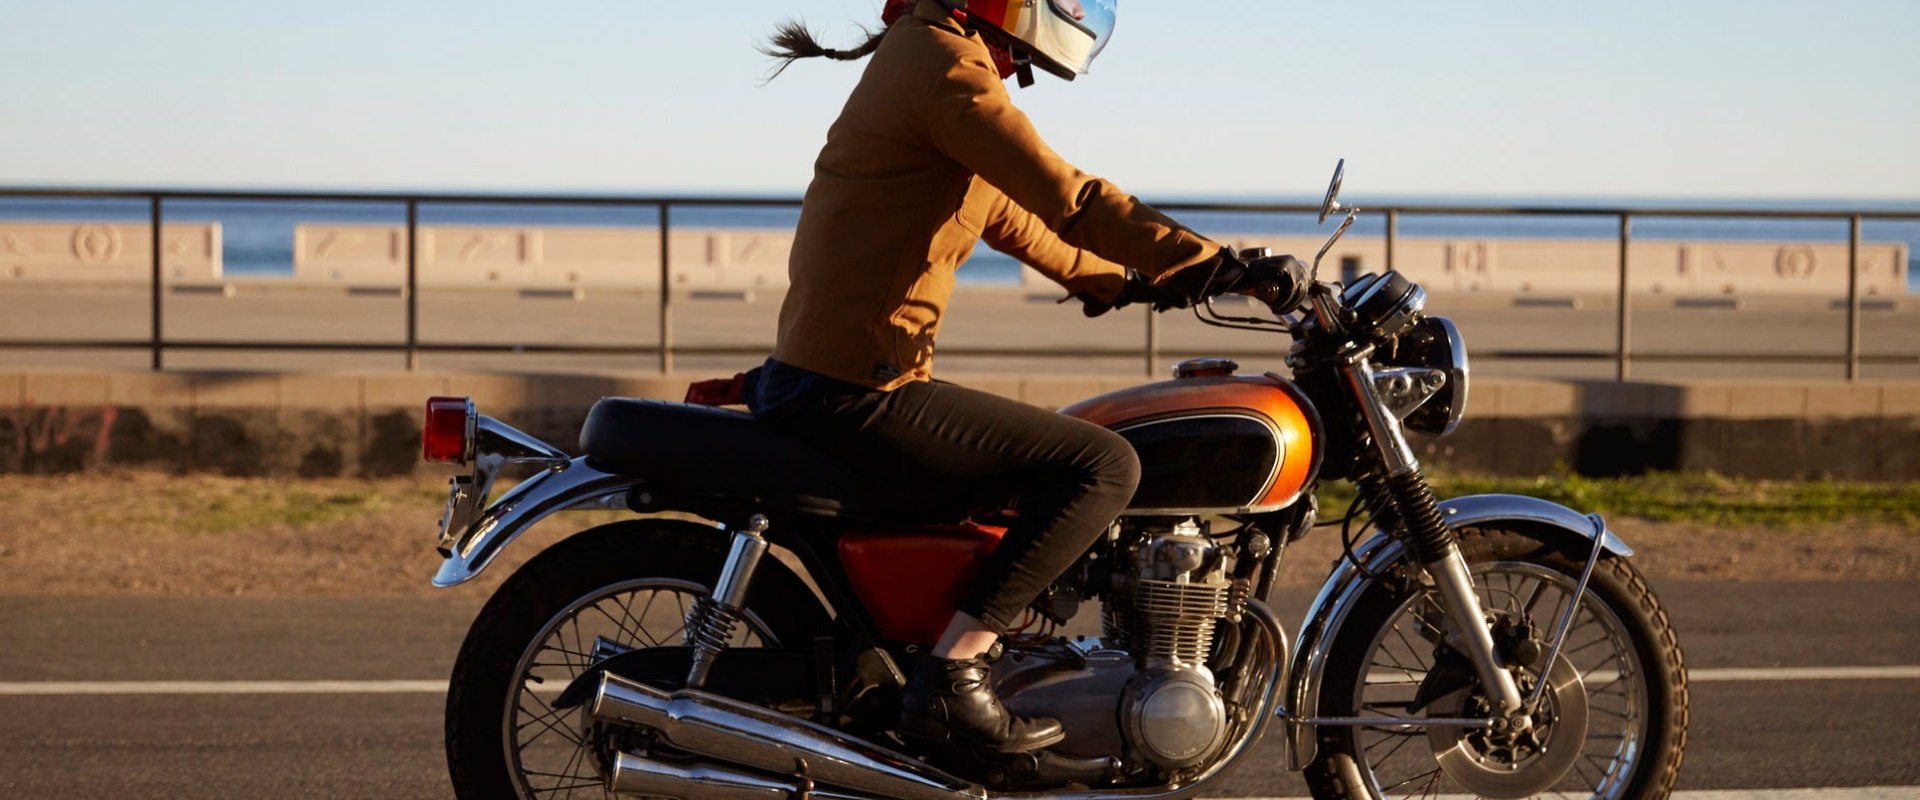 What Is The Minimum Motorcycle Insurance Cost In California?